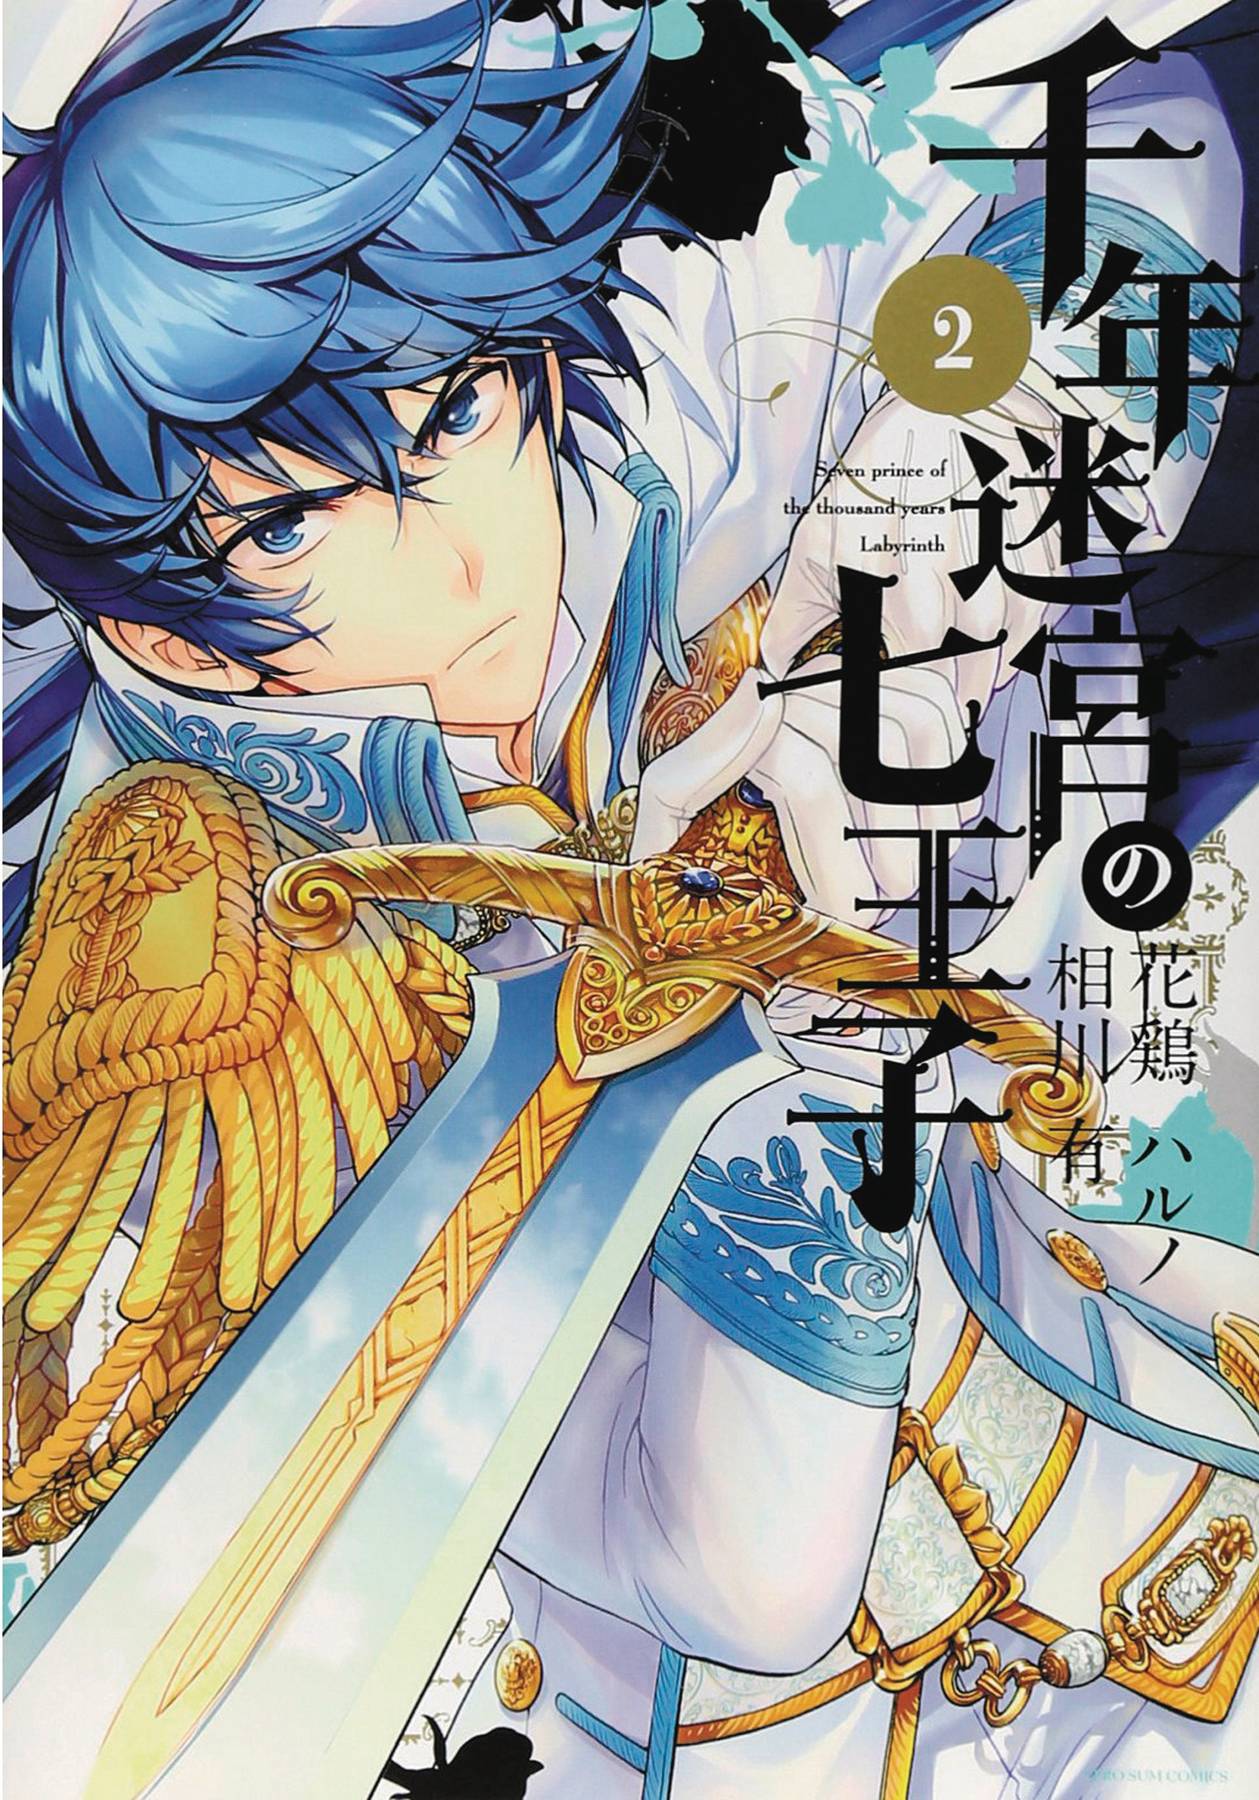 SEVEN PRINCES OF THOUSAND YEAR LABYRINTH GN VOL 02